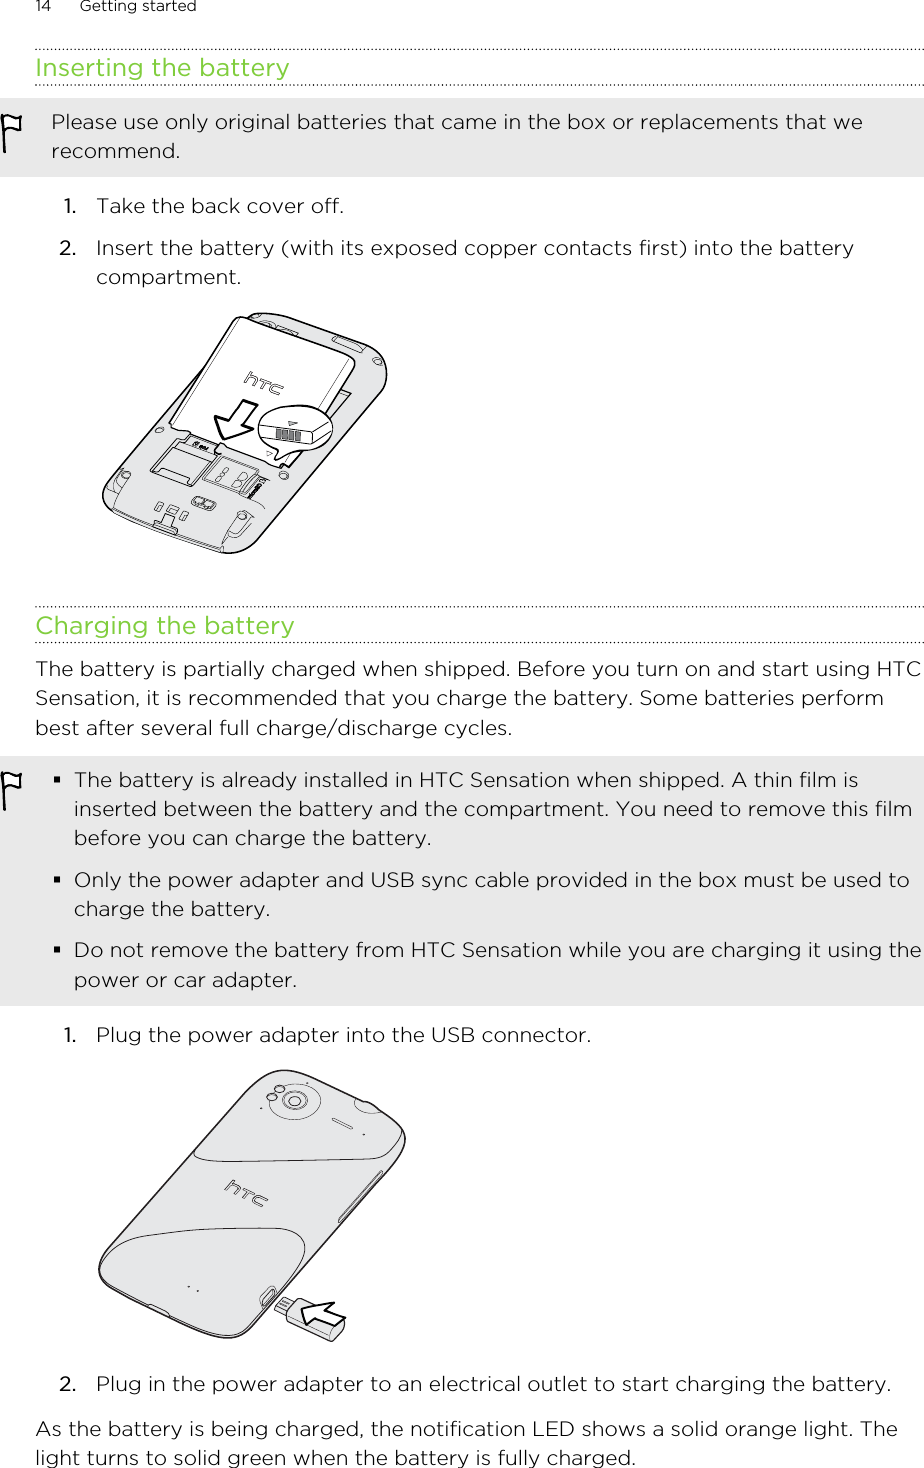 Inserting the batteryPlease use only original batteries that came in the box or replacements that werecommend.1. Take the back cover off.2. Insert the battery (with its exposed copper contacts first) into the batterycompartment. Charging the batteryThe battery is partially charged when shipped. Before you turn on and start using HTCSensation, it is recommended that you charge the battery. Some batteries performbest after several full charge/discharge cycles.§The battery is already installed in HTC Sensation when shipped. A thin film isinserted between the battery and the compartment. You need to remove this filmbefore you can charge the battery.§Only the power adapter and USB sync cable provided in the box must be used tocharge the battery.§Do not remove the battery from HTC Sensation while you are charging it using thepower or car adapter.1. Plug the power adapter into the USB connector. 2. Plug in the power adapter to an electrical outlet to start charging the battery.As the battery is being charged, the notification LED shows a solid orange light. Thelight turns to solid green when the battery is fully charged.14 Getting started